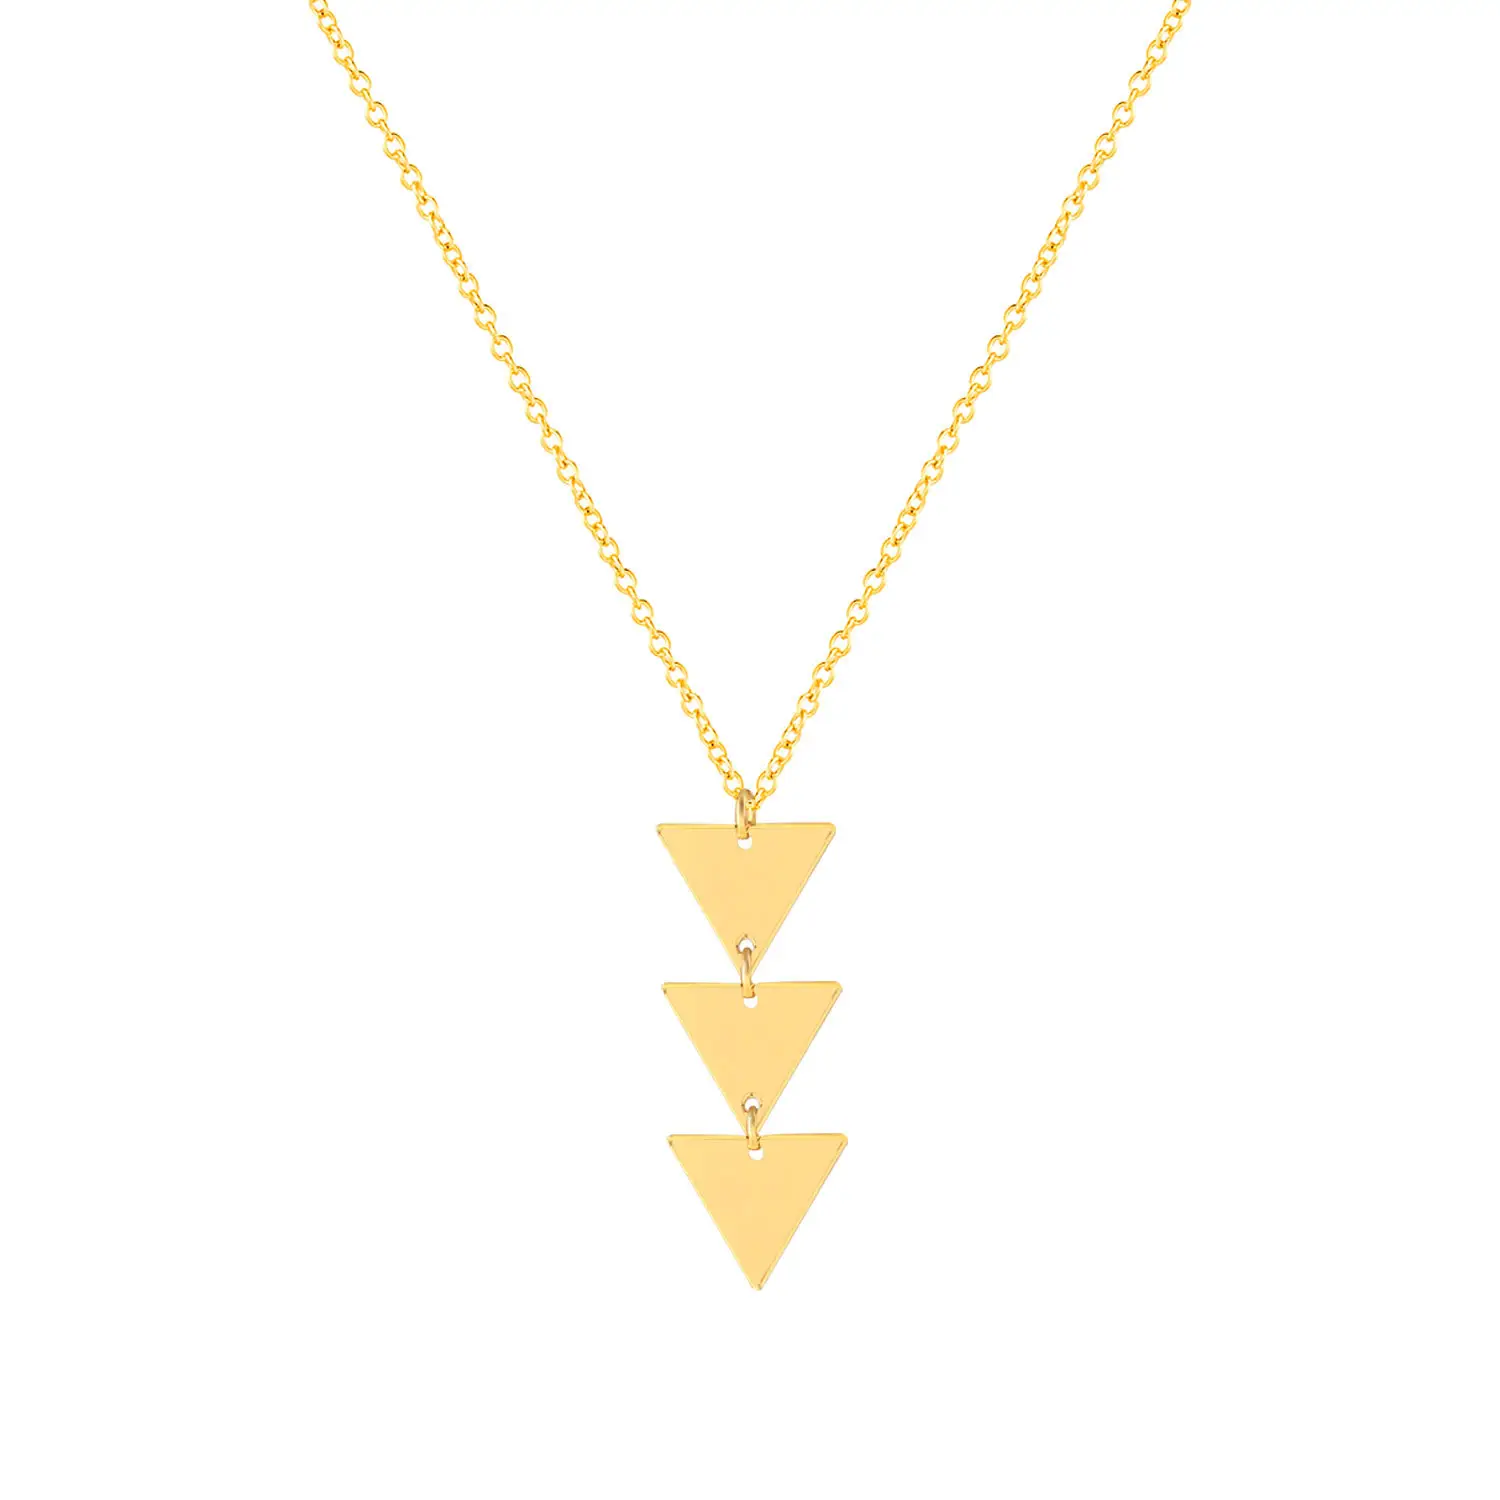 Exaggerated Charm Gold Plated Fashion Bar Long Y-Necklace Jewelry For Women Girl Geometric Arrow Pendant Three Triangle Necklace